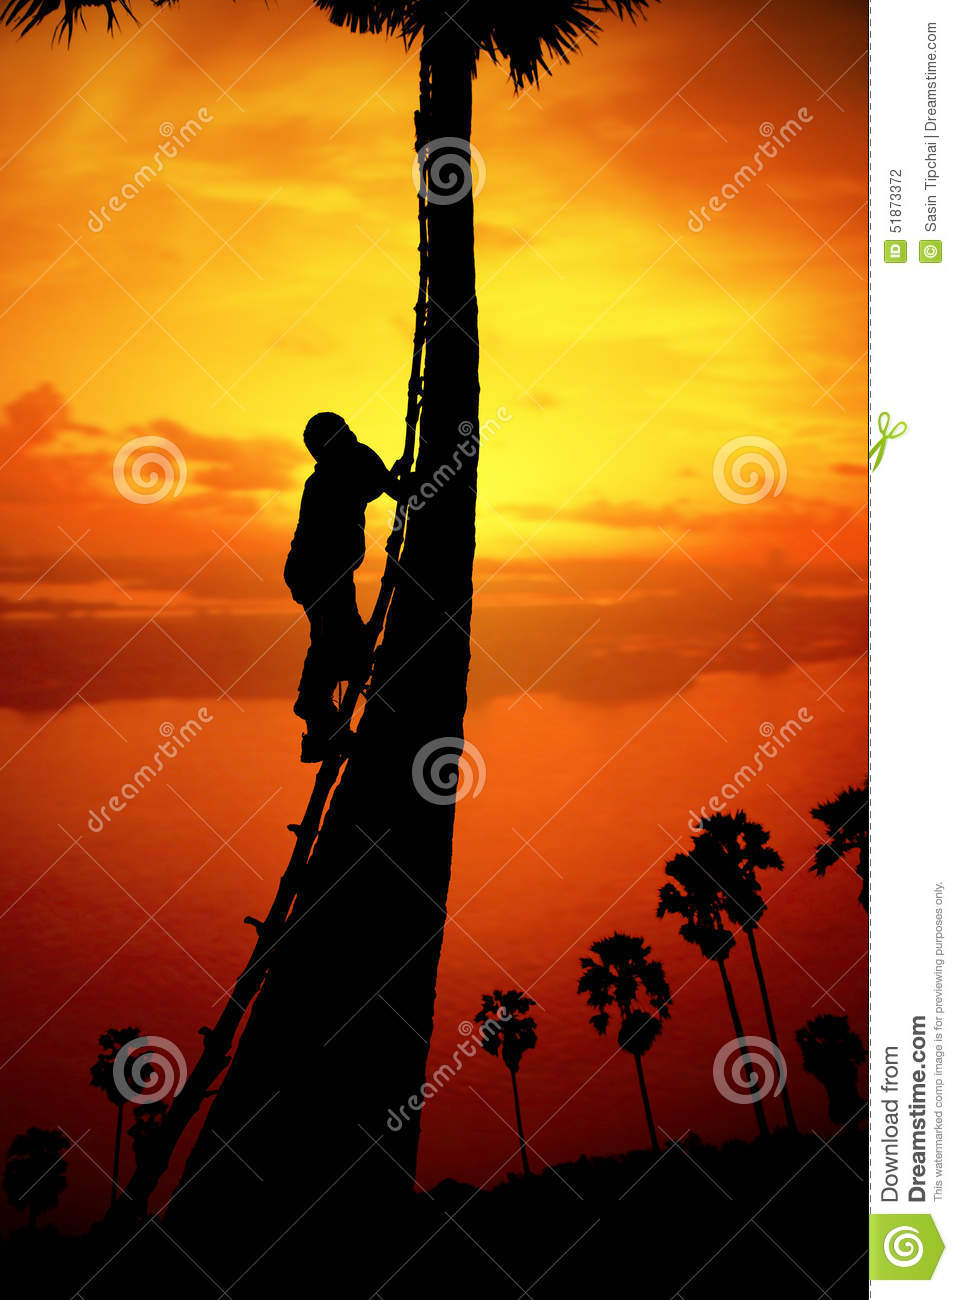 Man Climbing A Sugar Palm Tree To Collect Sap In The Countryside